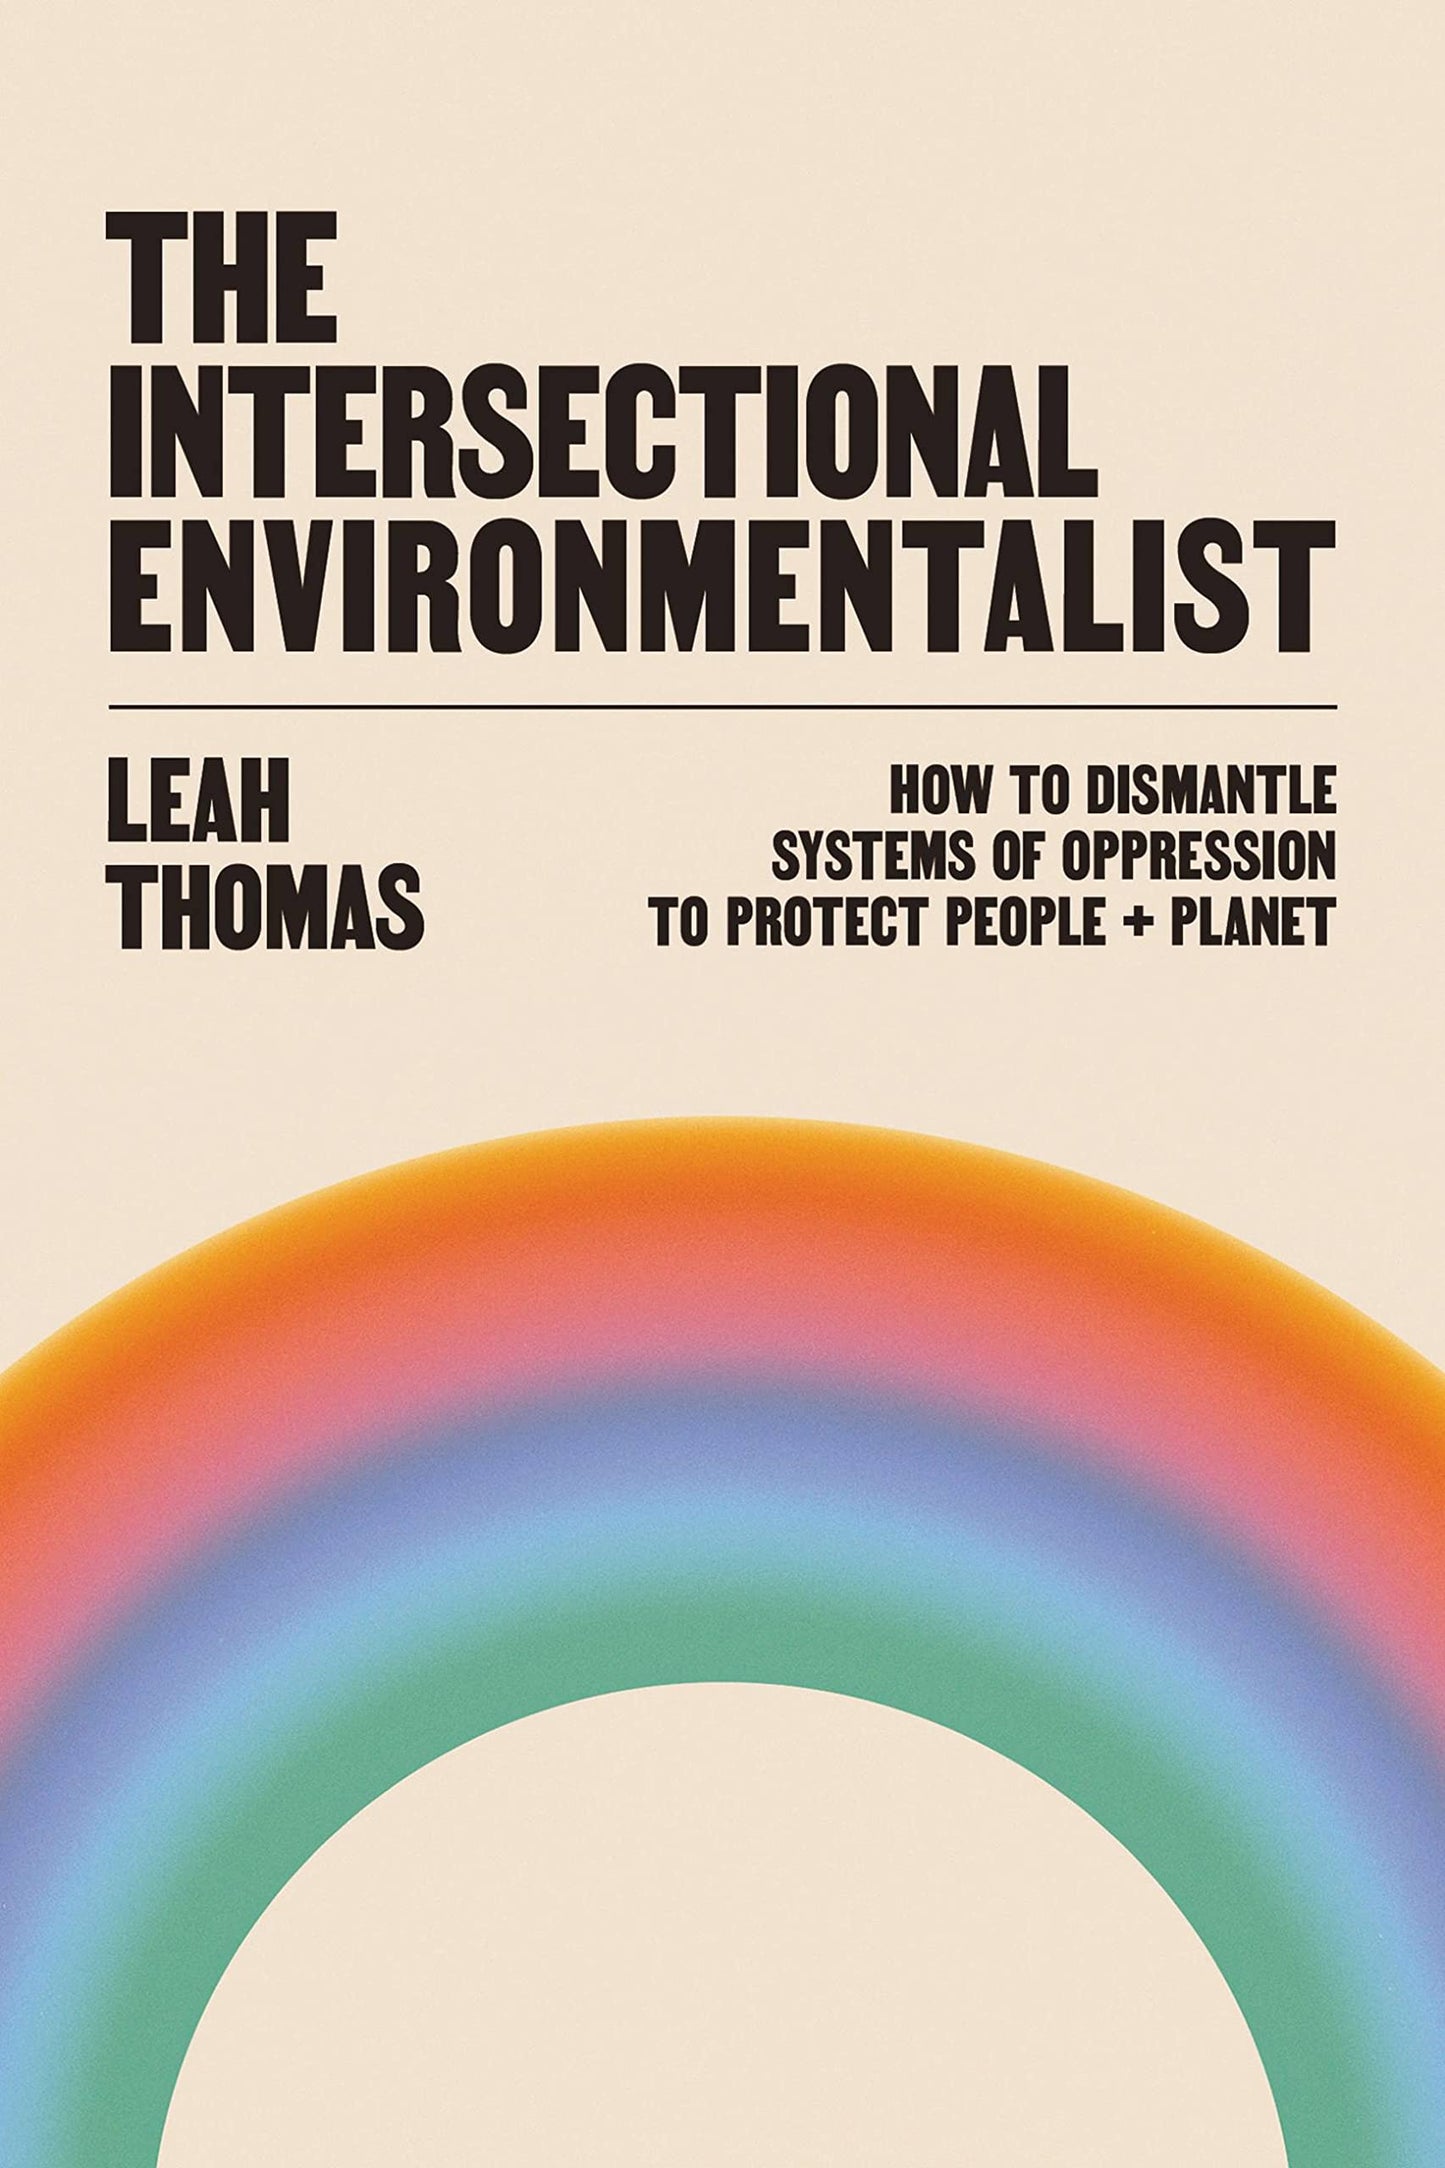 The Intersectional Environmentalist // How to Dismantle Systems of Oppression to Protect People + Planet